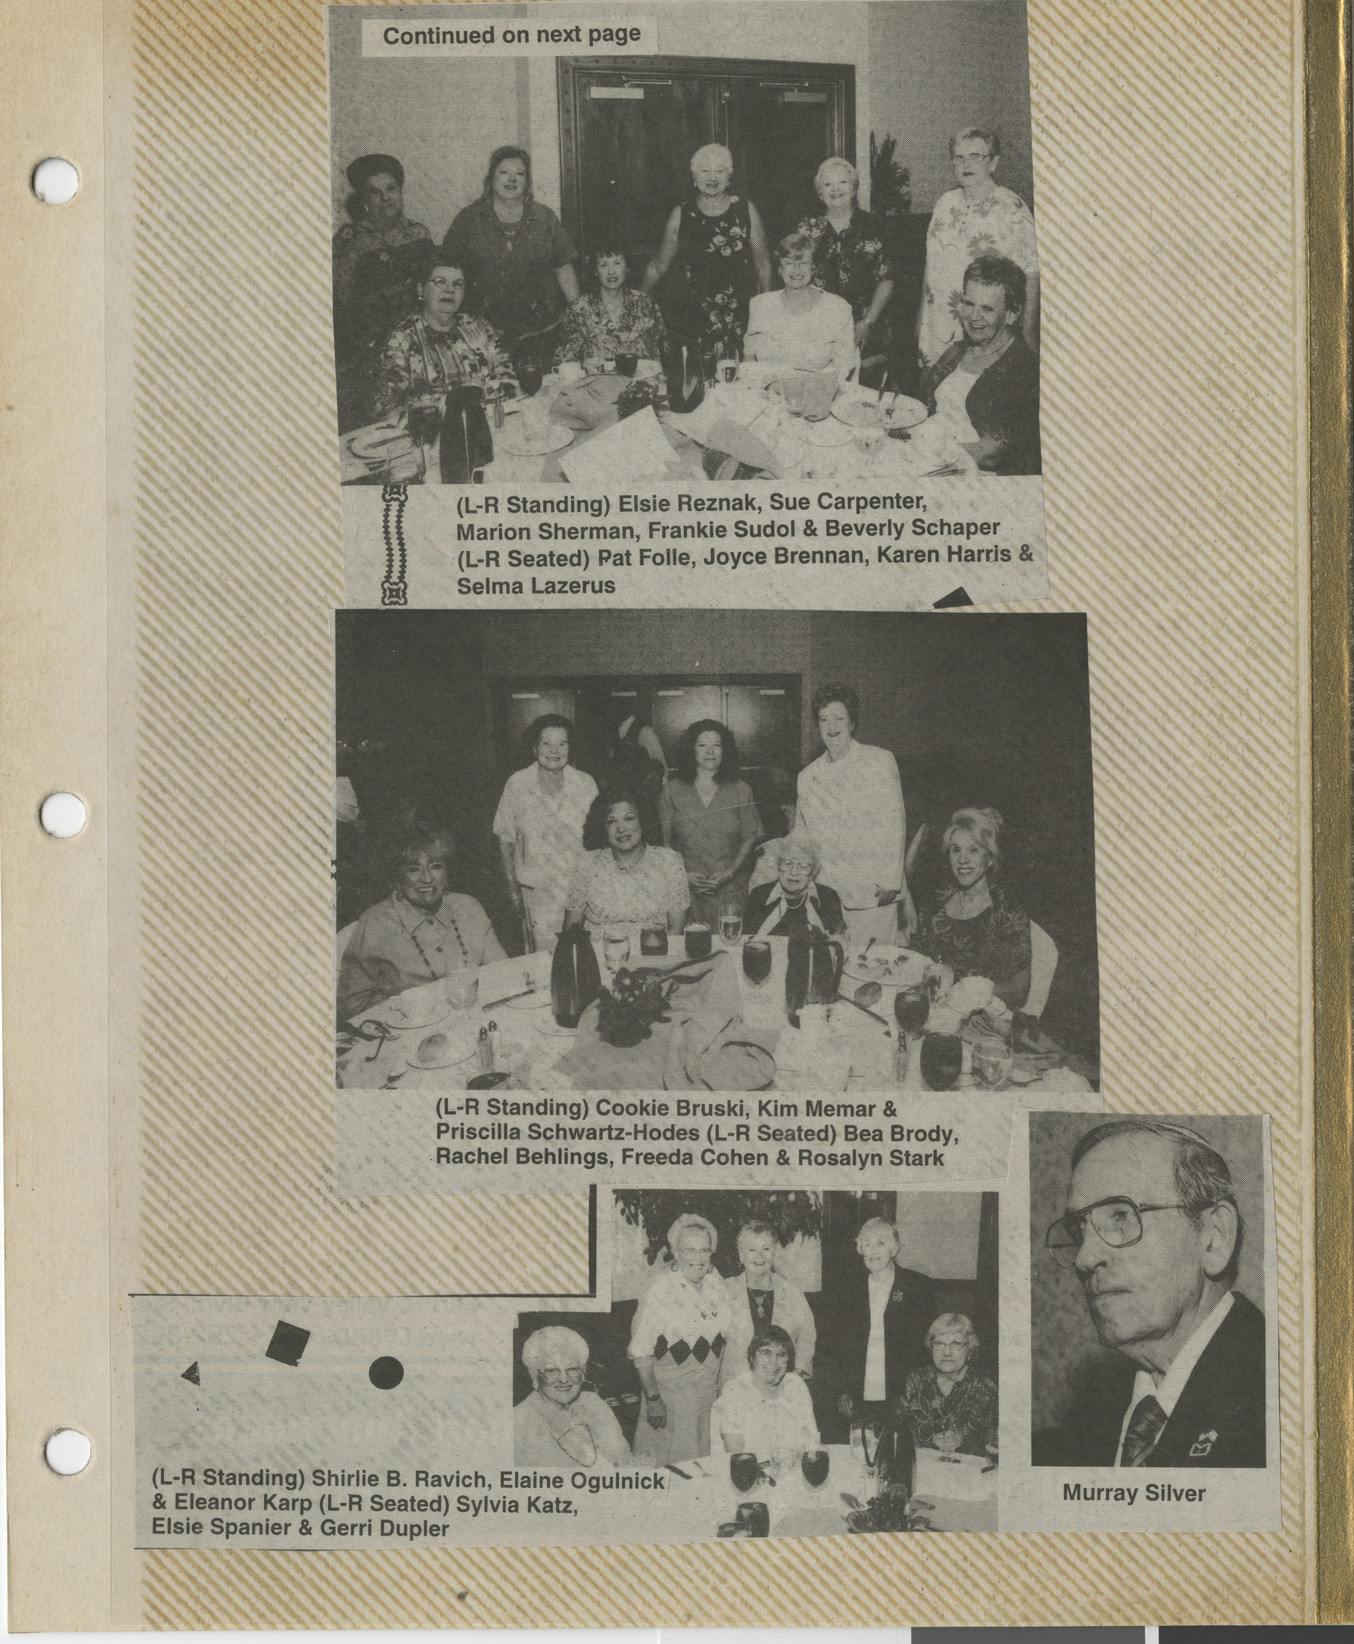 Newspaper clipping for Hadassah event, publication and date unknown